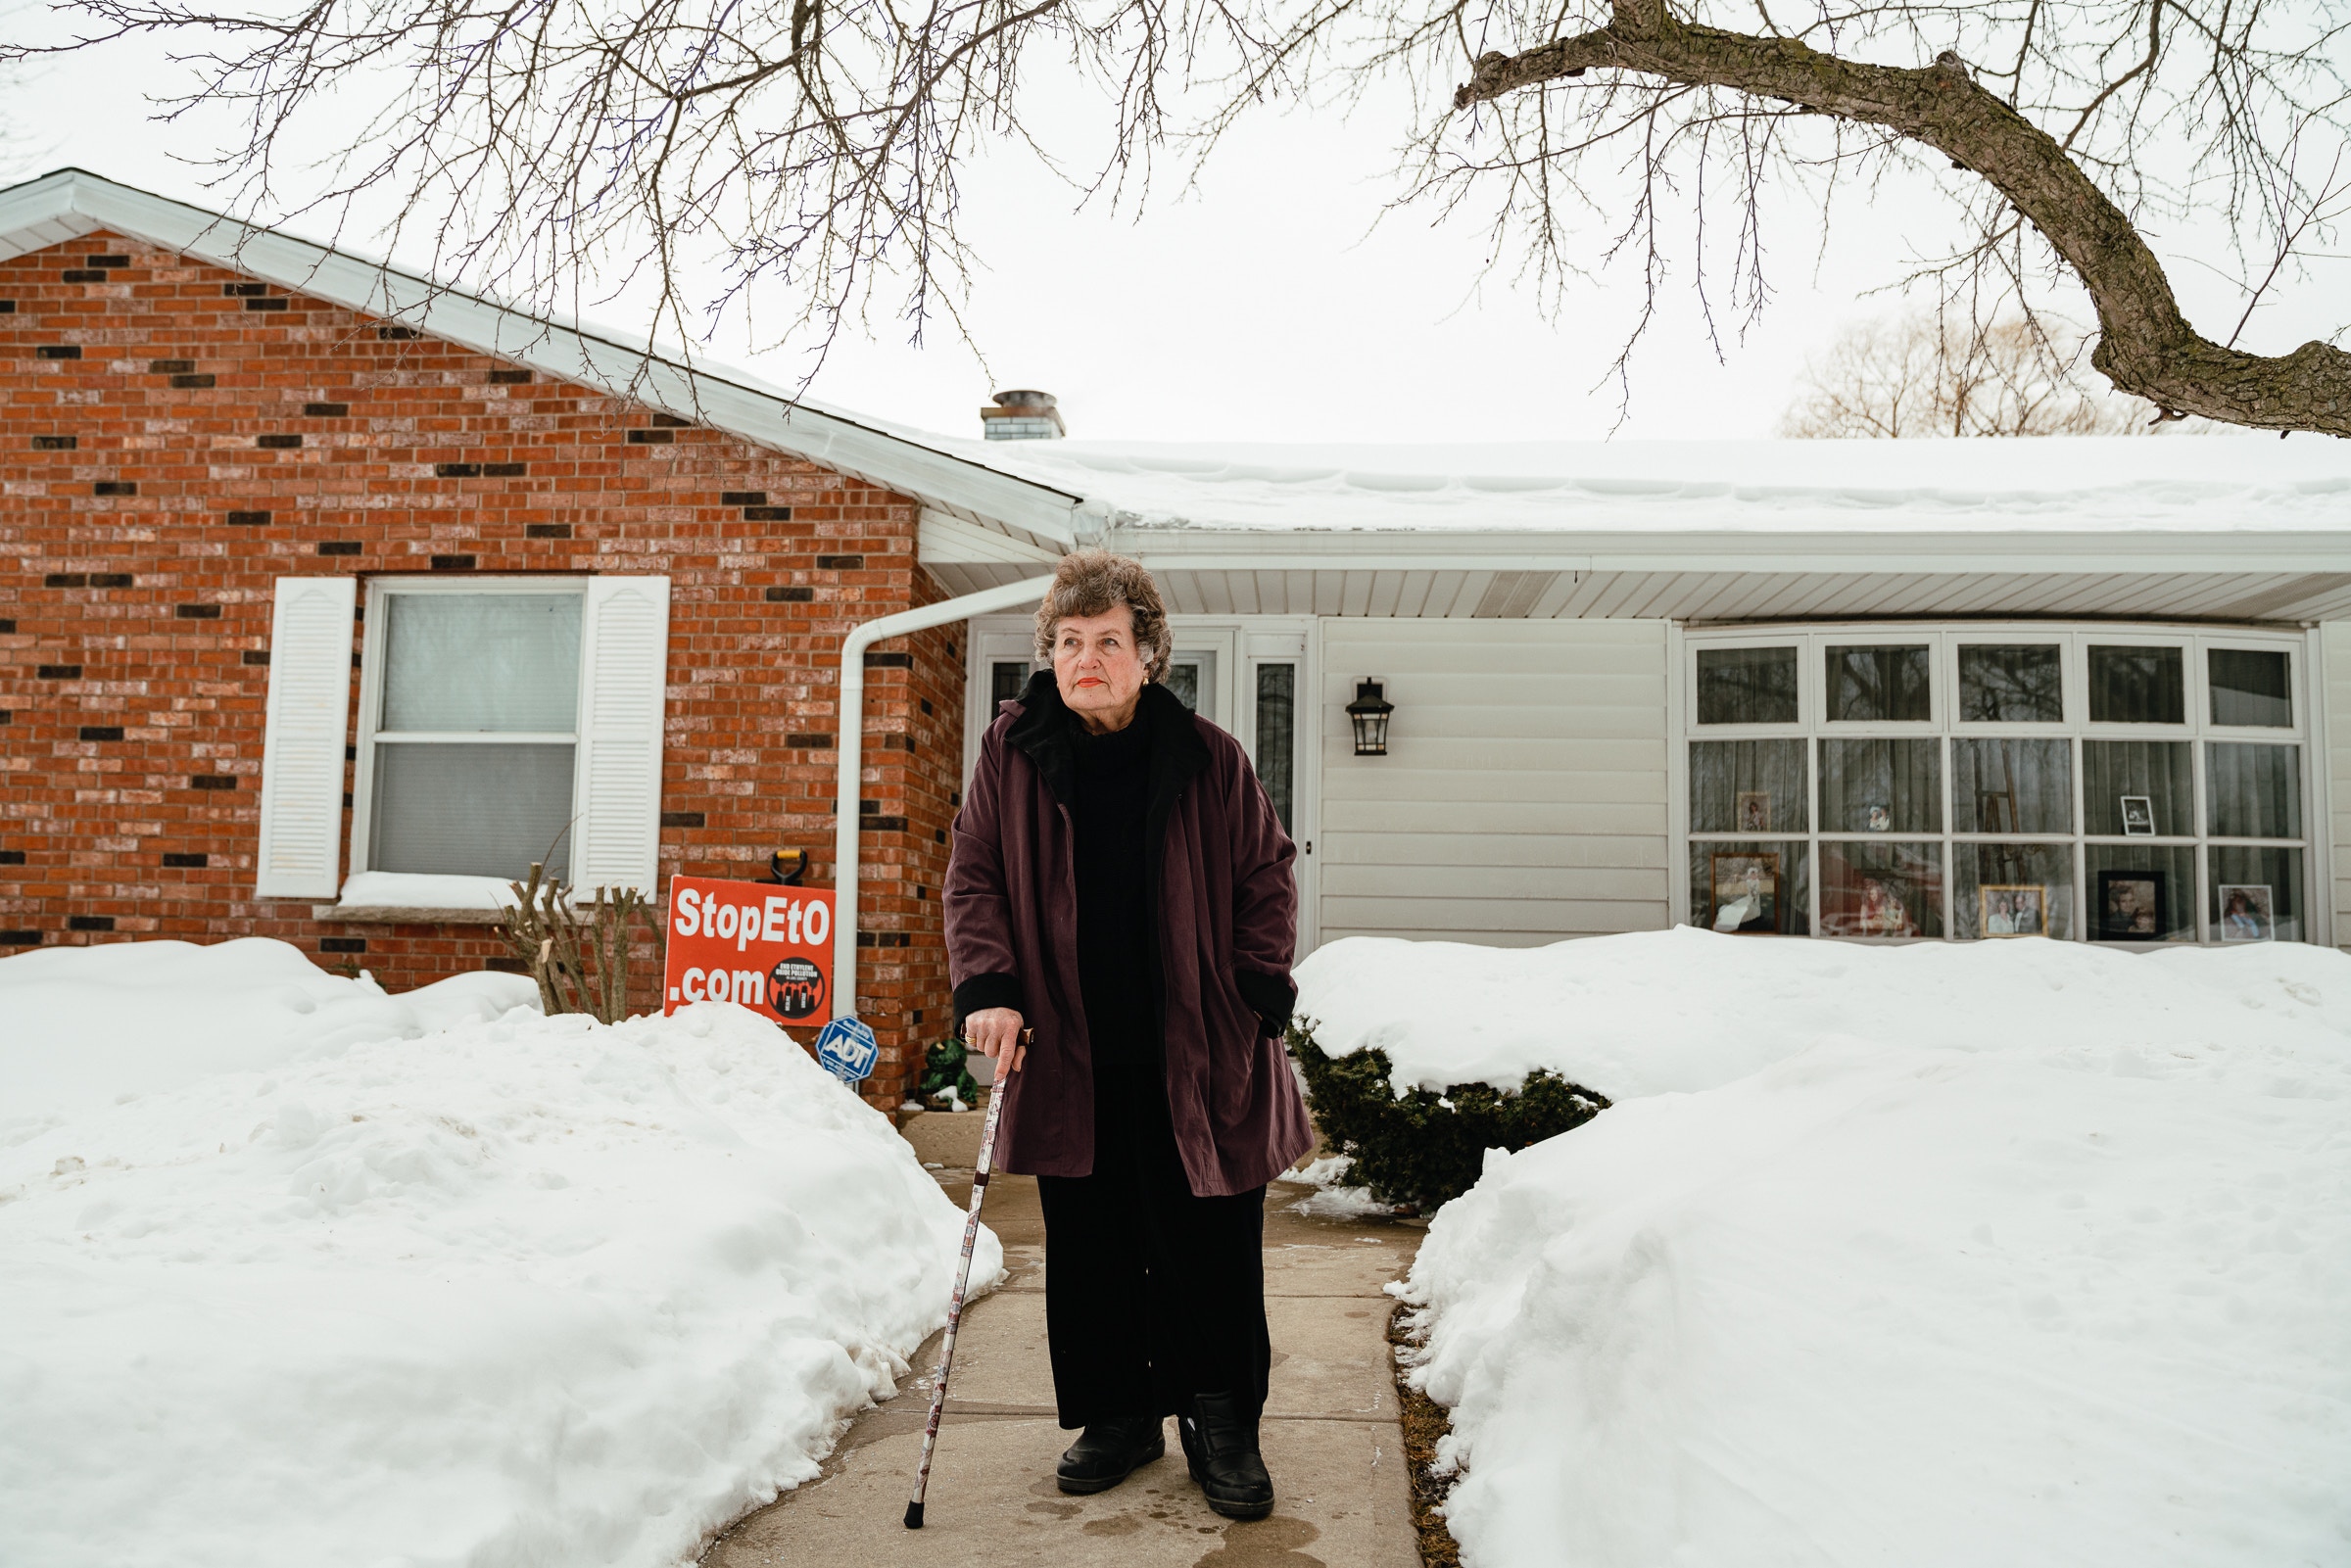 Millie Corder outside of her in Wadsworth, IL on February 21, 2021. Millie’s home is located about 3 miles from the Vantage Specialty Plant. Jamie Kelter Davis for The Intercept.